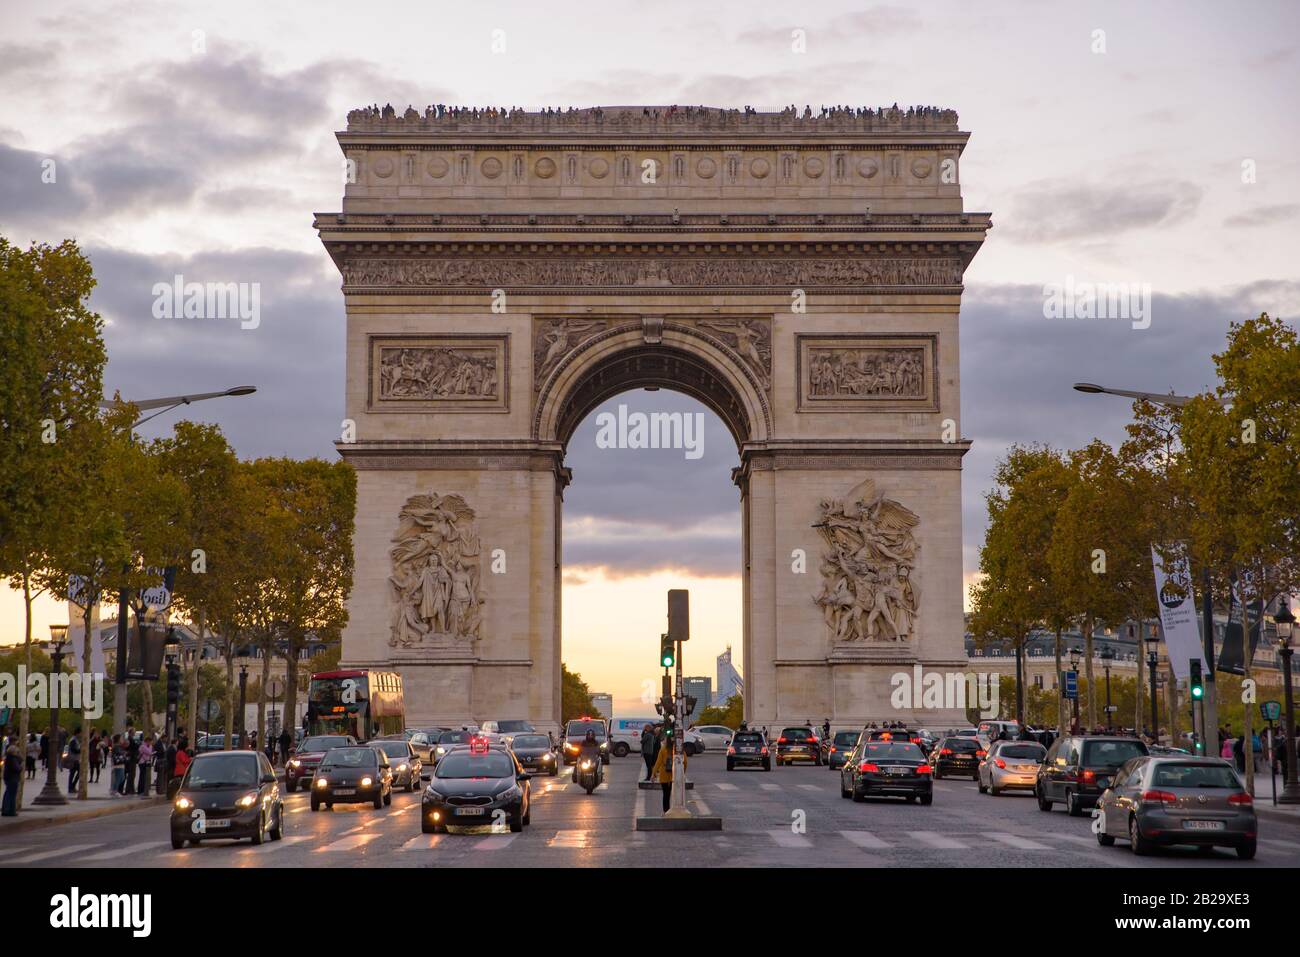 The traffic at sunset time in front of Arc de Triomphe, one of the most famous landmark in Paris, France Stock Photo